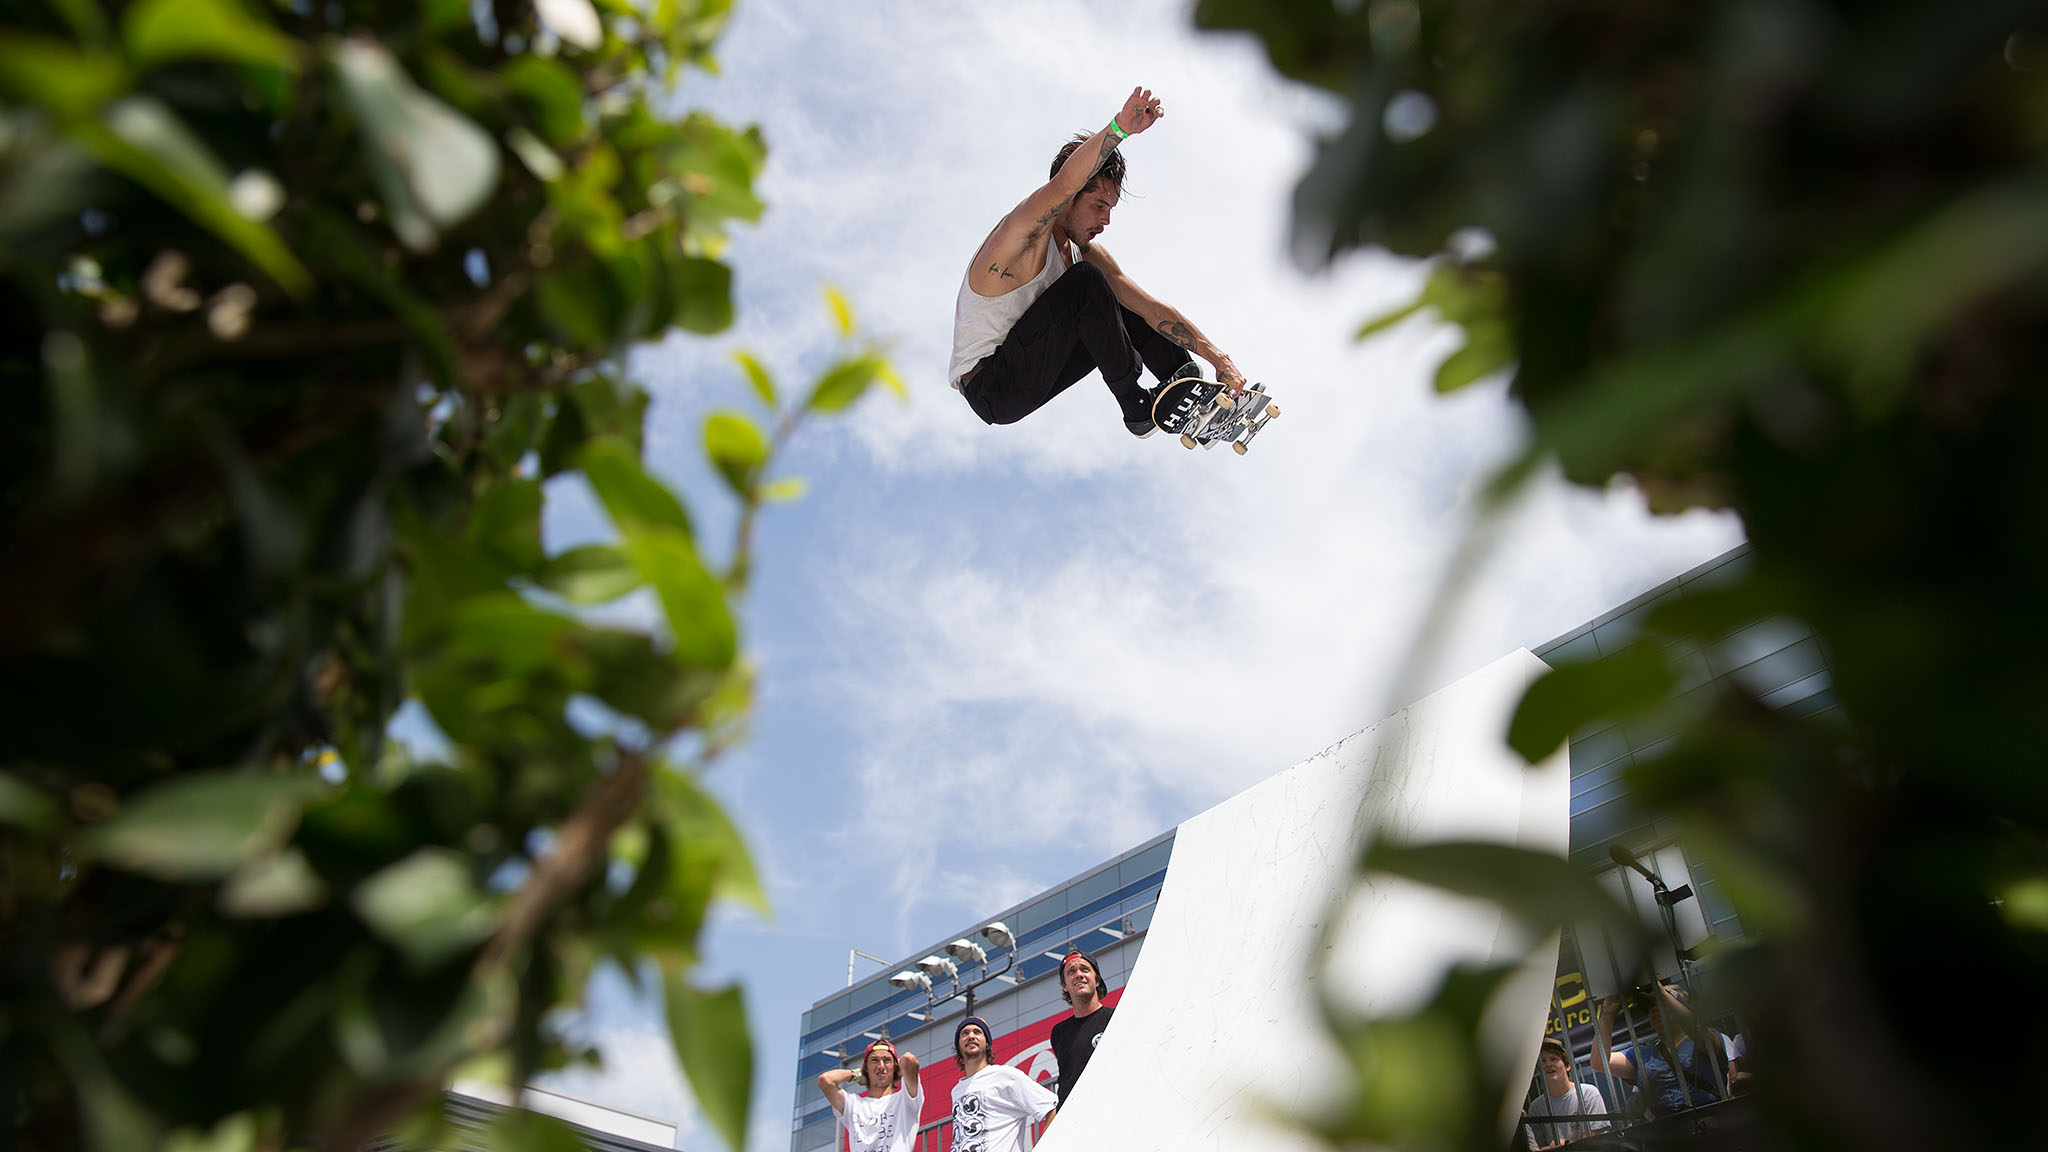 Friday was jam-packed with action, as skateboard heavies were eliminated in Street League and Skateboard Vert qualifications, Moto X Speed & Style saw a champ return while GoPro BMX Big Air crowned a new king, and X Games MUSIC rocked the party until the wee hours.